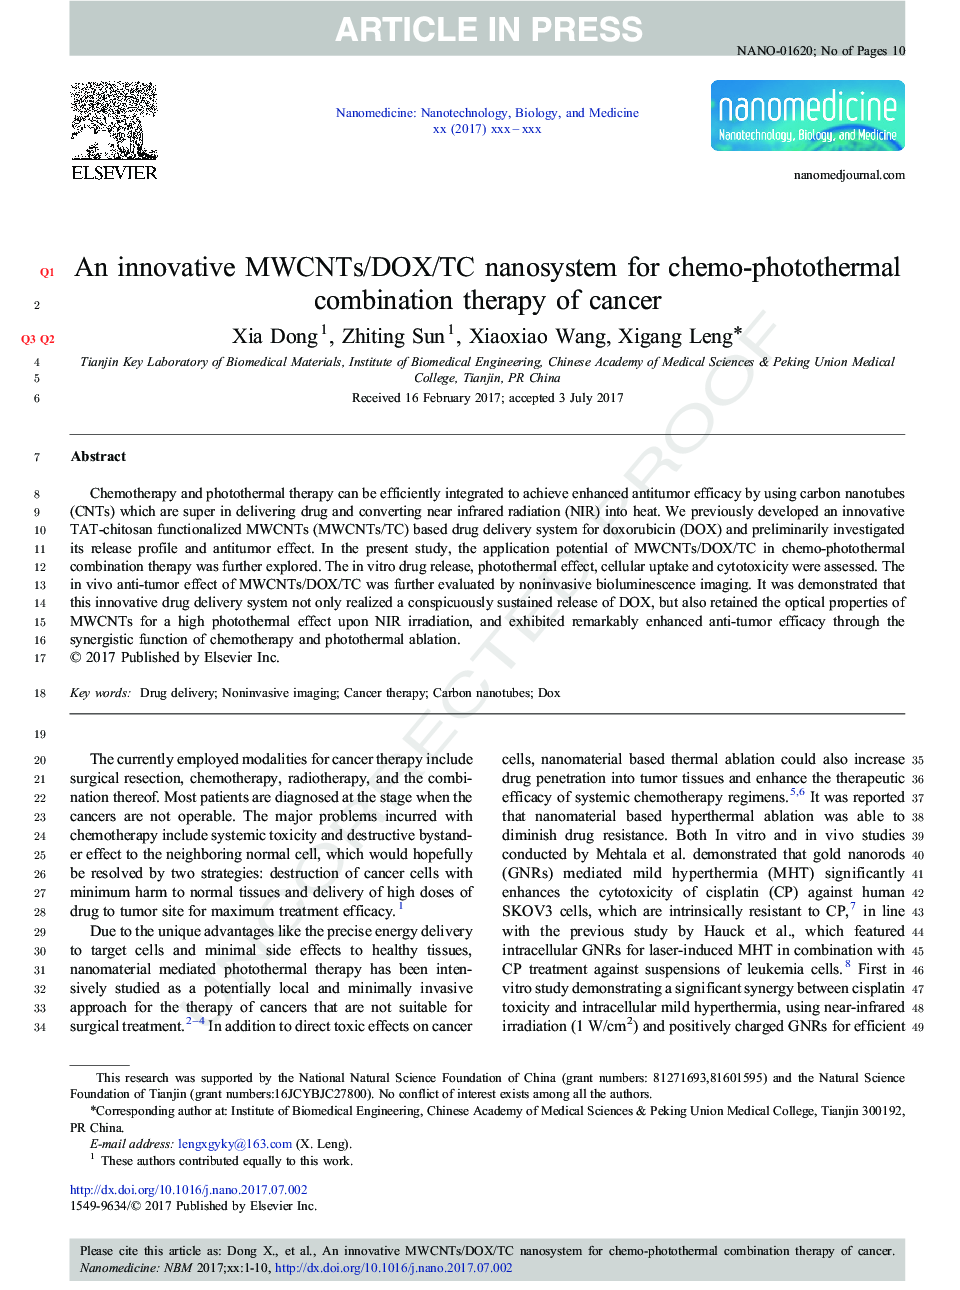 An innovative MWCNTs/DOX/TC nanosystem for chemo-photothermal combination therapy of cancer